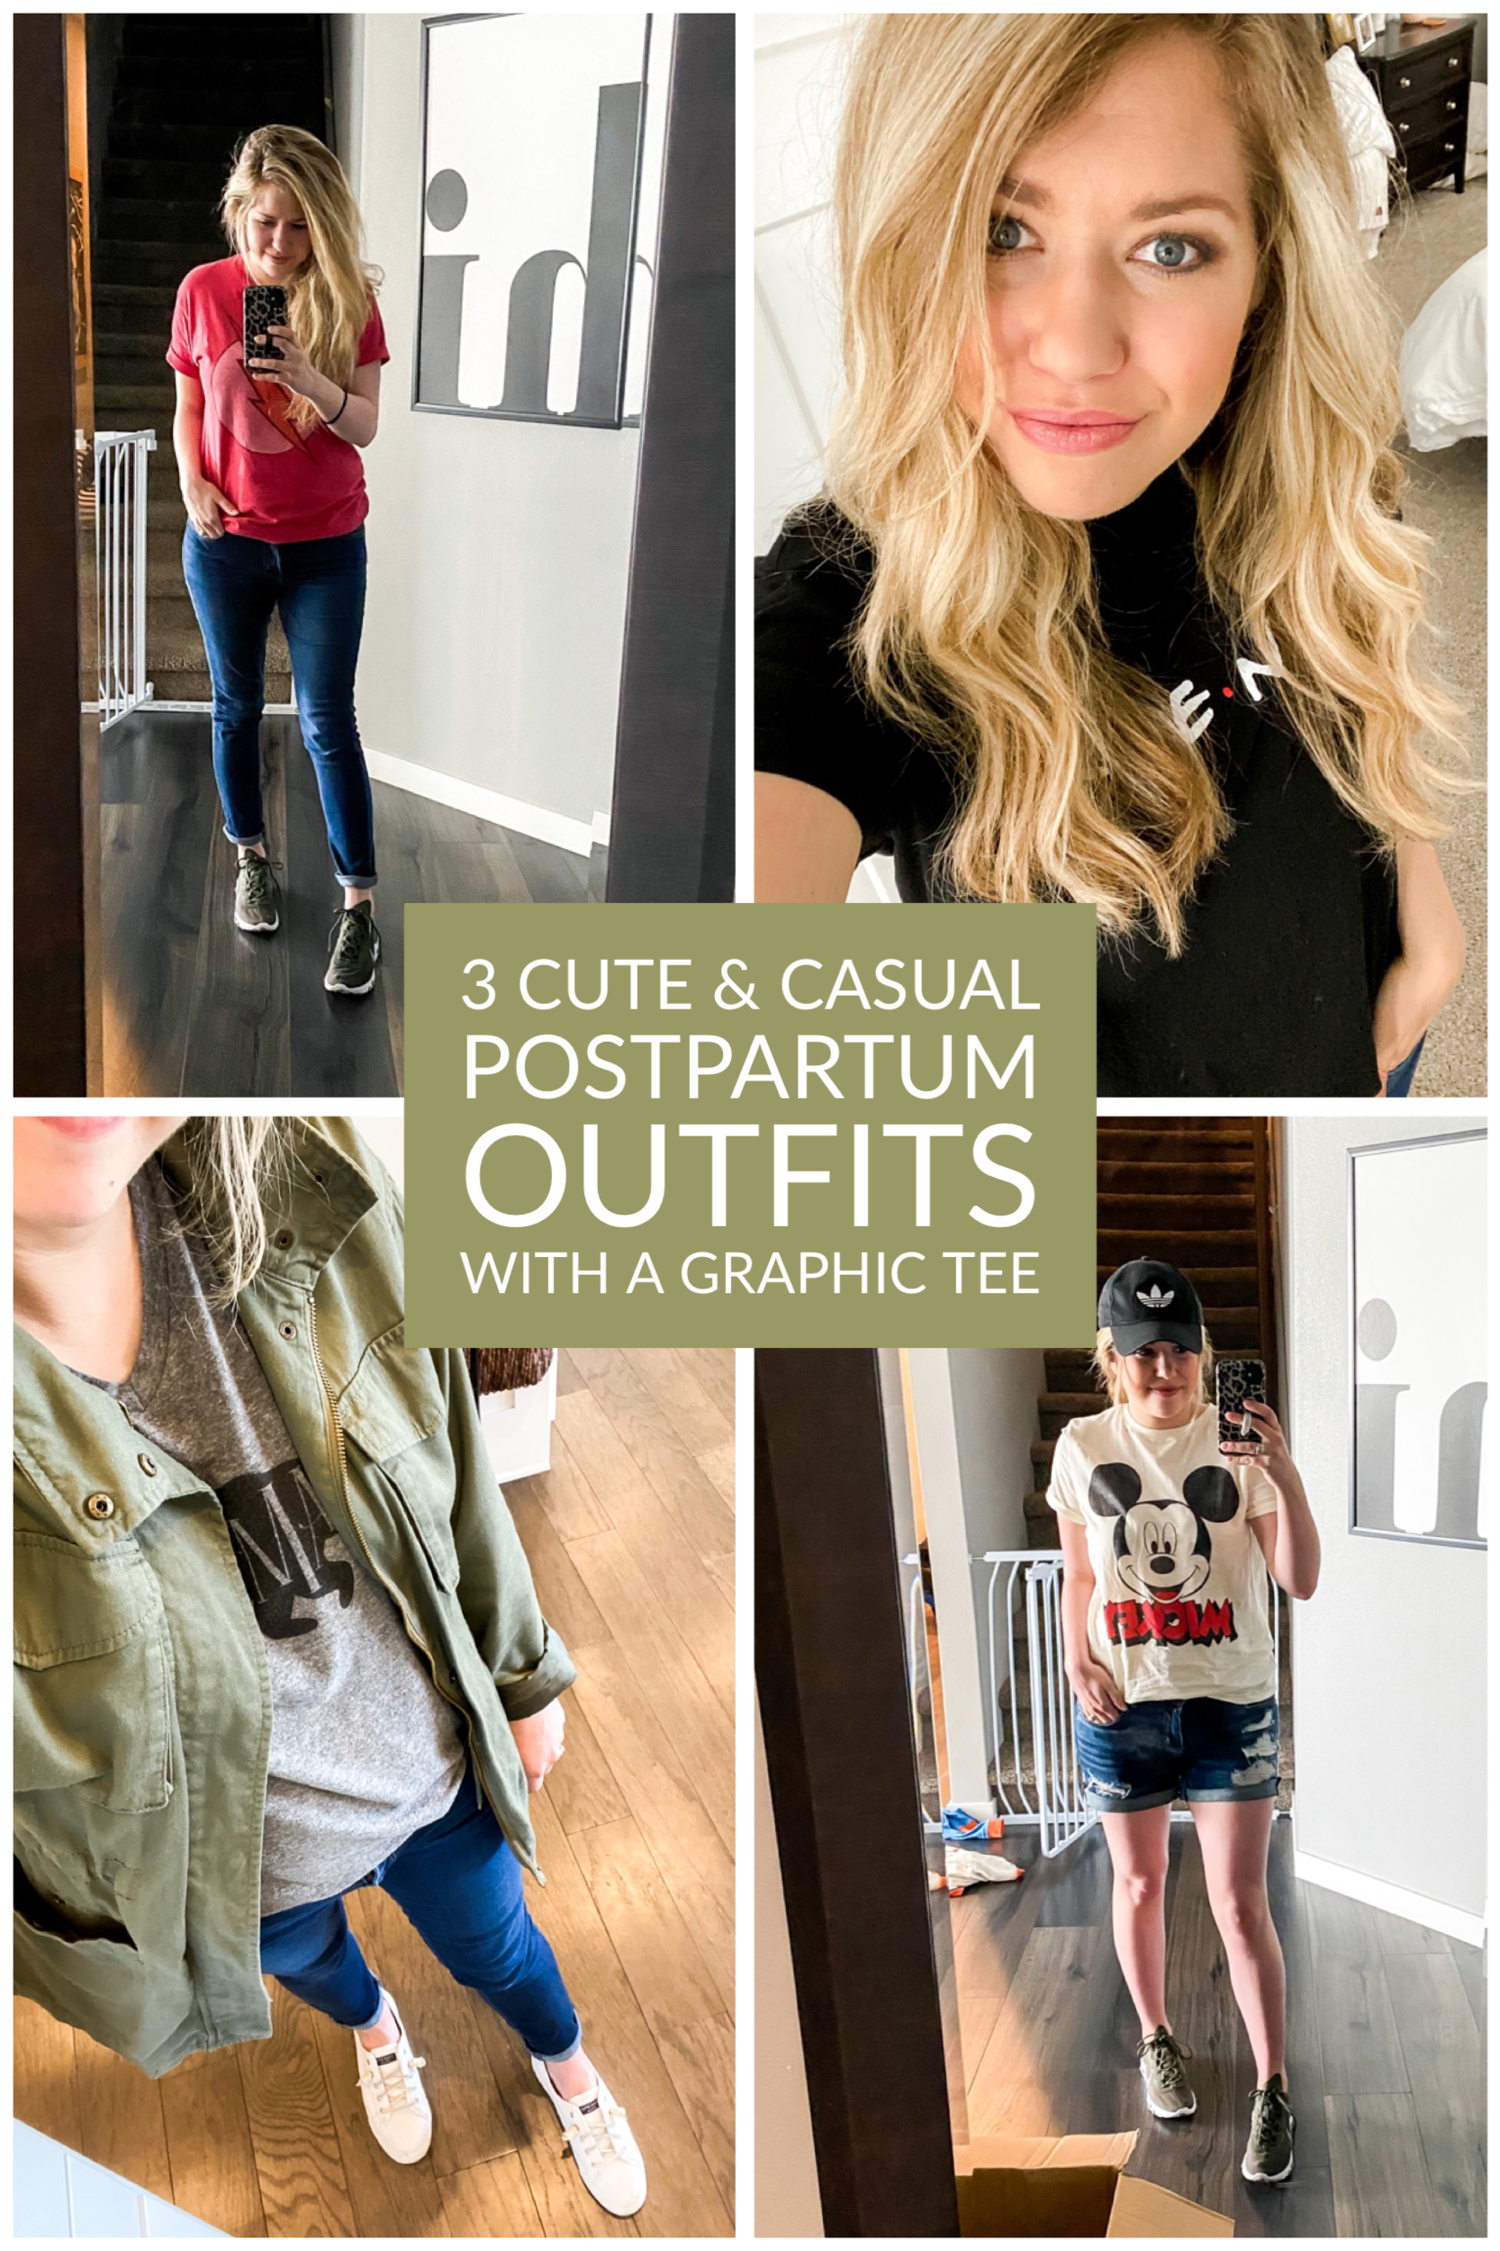 3 Cute & Casual Postpartum Outfits to Wear with a Graphic Tee